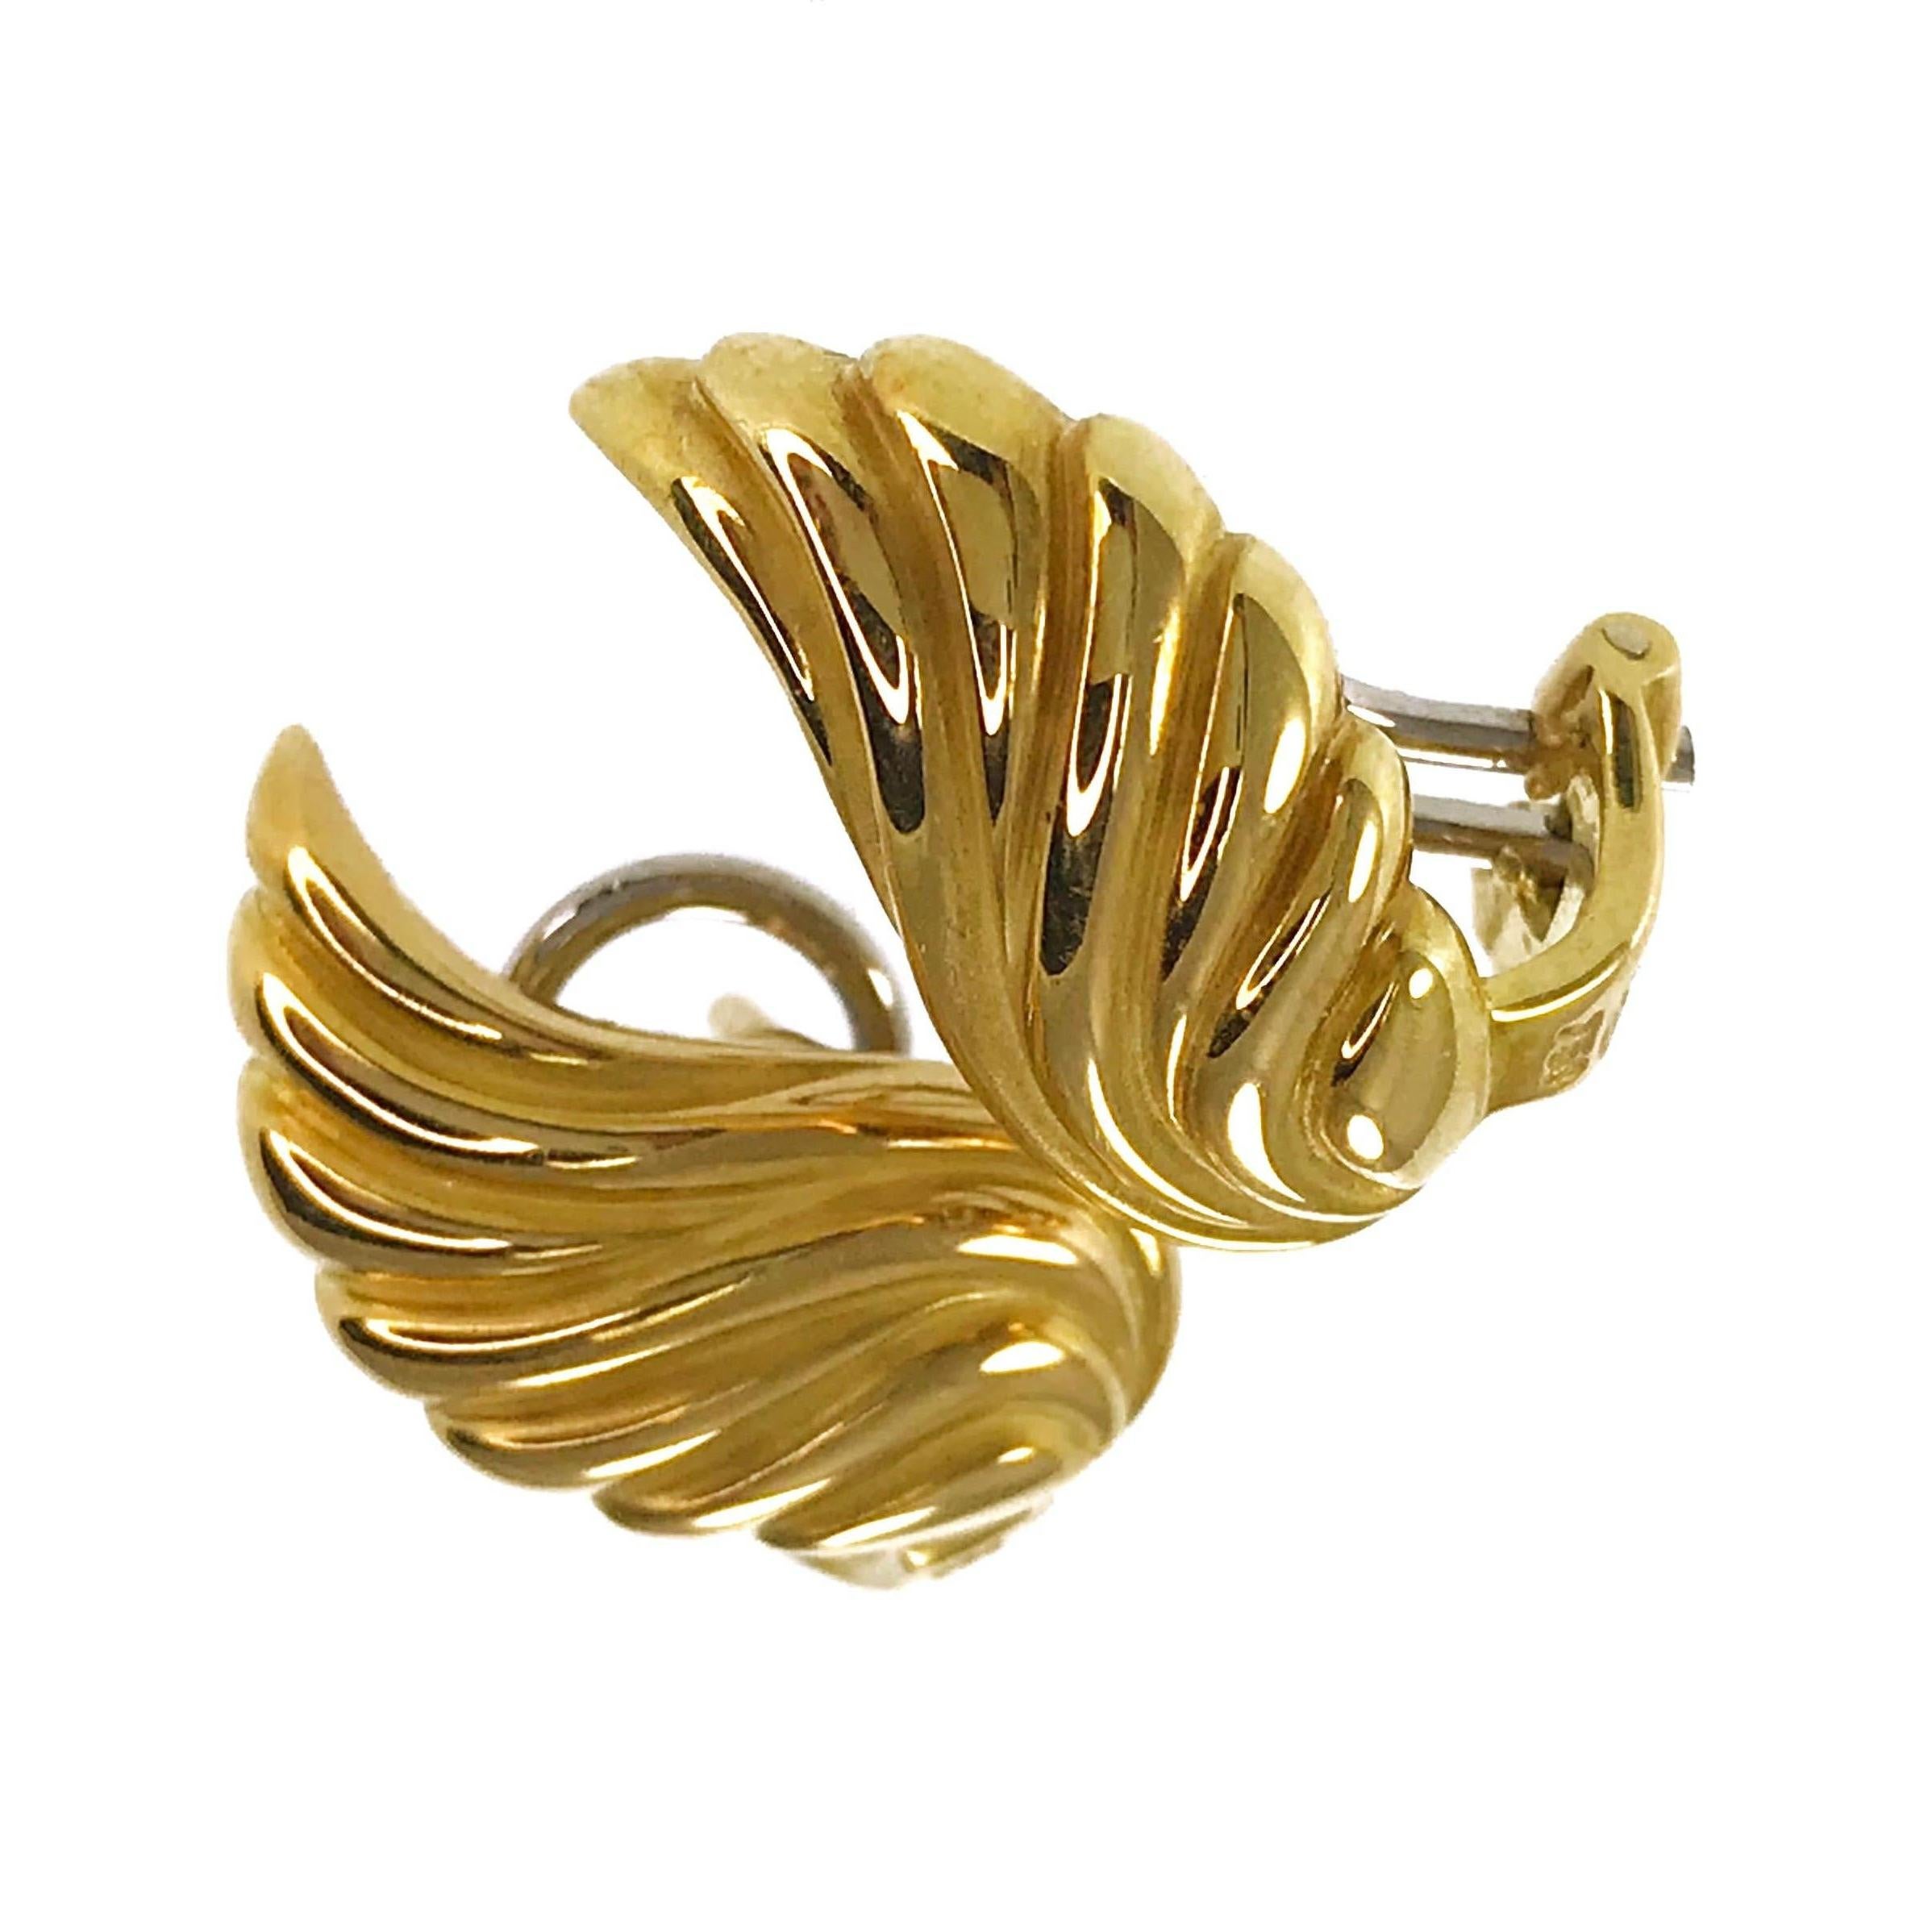 Gübelin 18 Karat Wing-Shaped Earrings. These lovely earrings consist of sculpted gold forming a wing-shaped drop earring. The earring measures 18.5mm wide x 9.6mm tall and have a short post and Omega clip back. Stamped on the bottom of the earrings